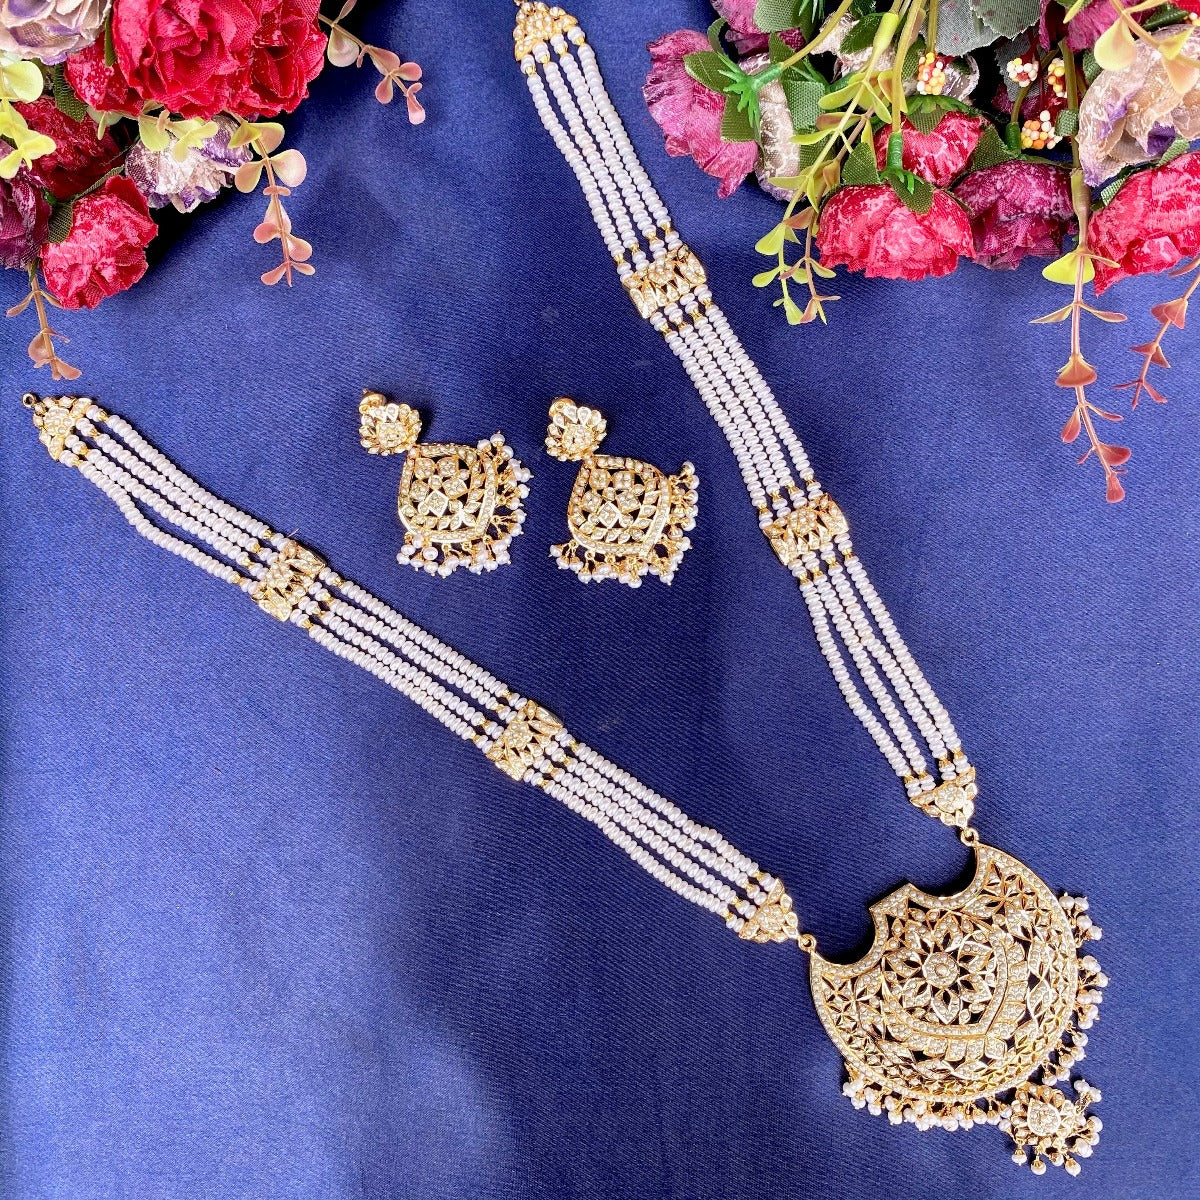 Long Pearl Necklace | Traditional Rani Haar | Freshwater Pearls HR 008